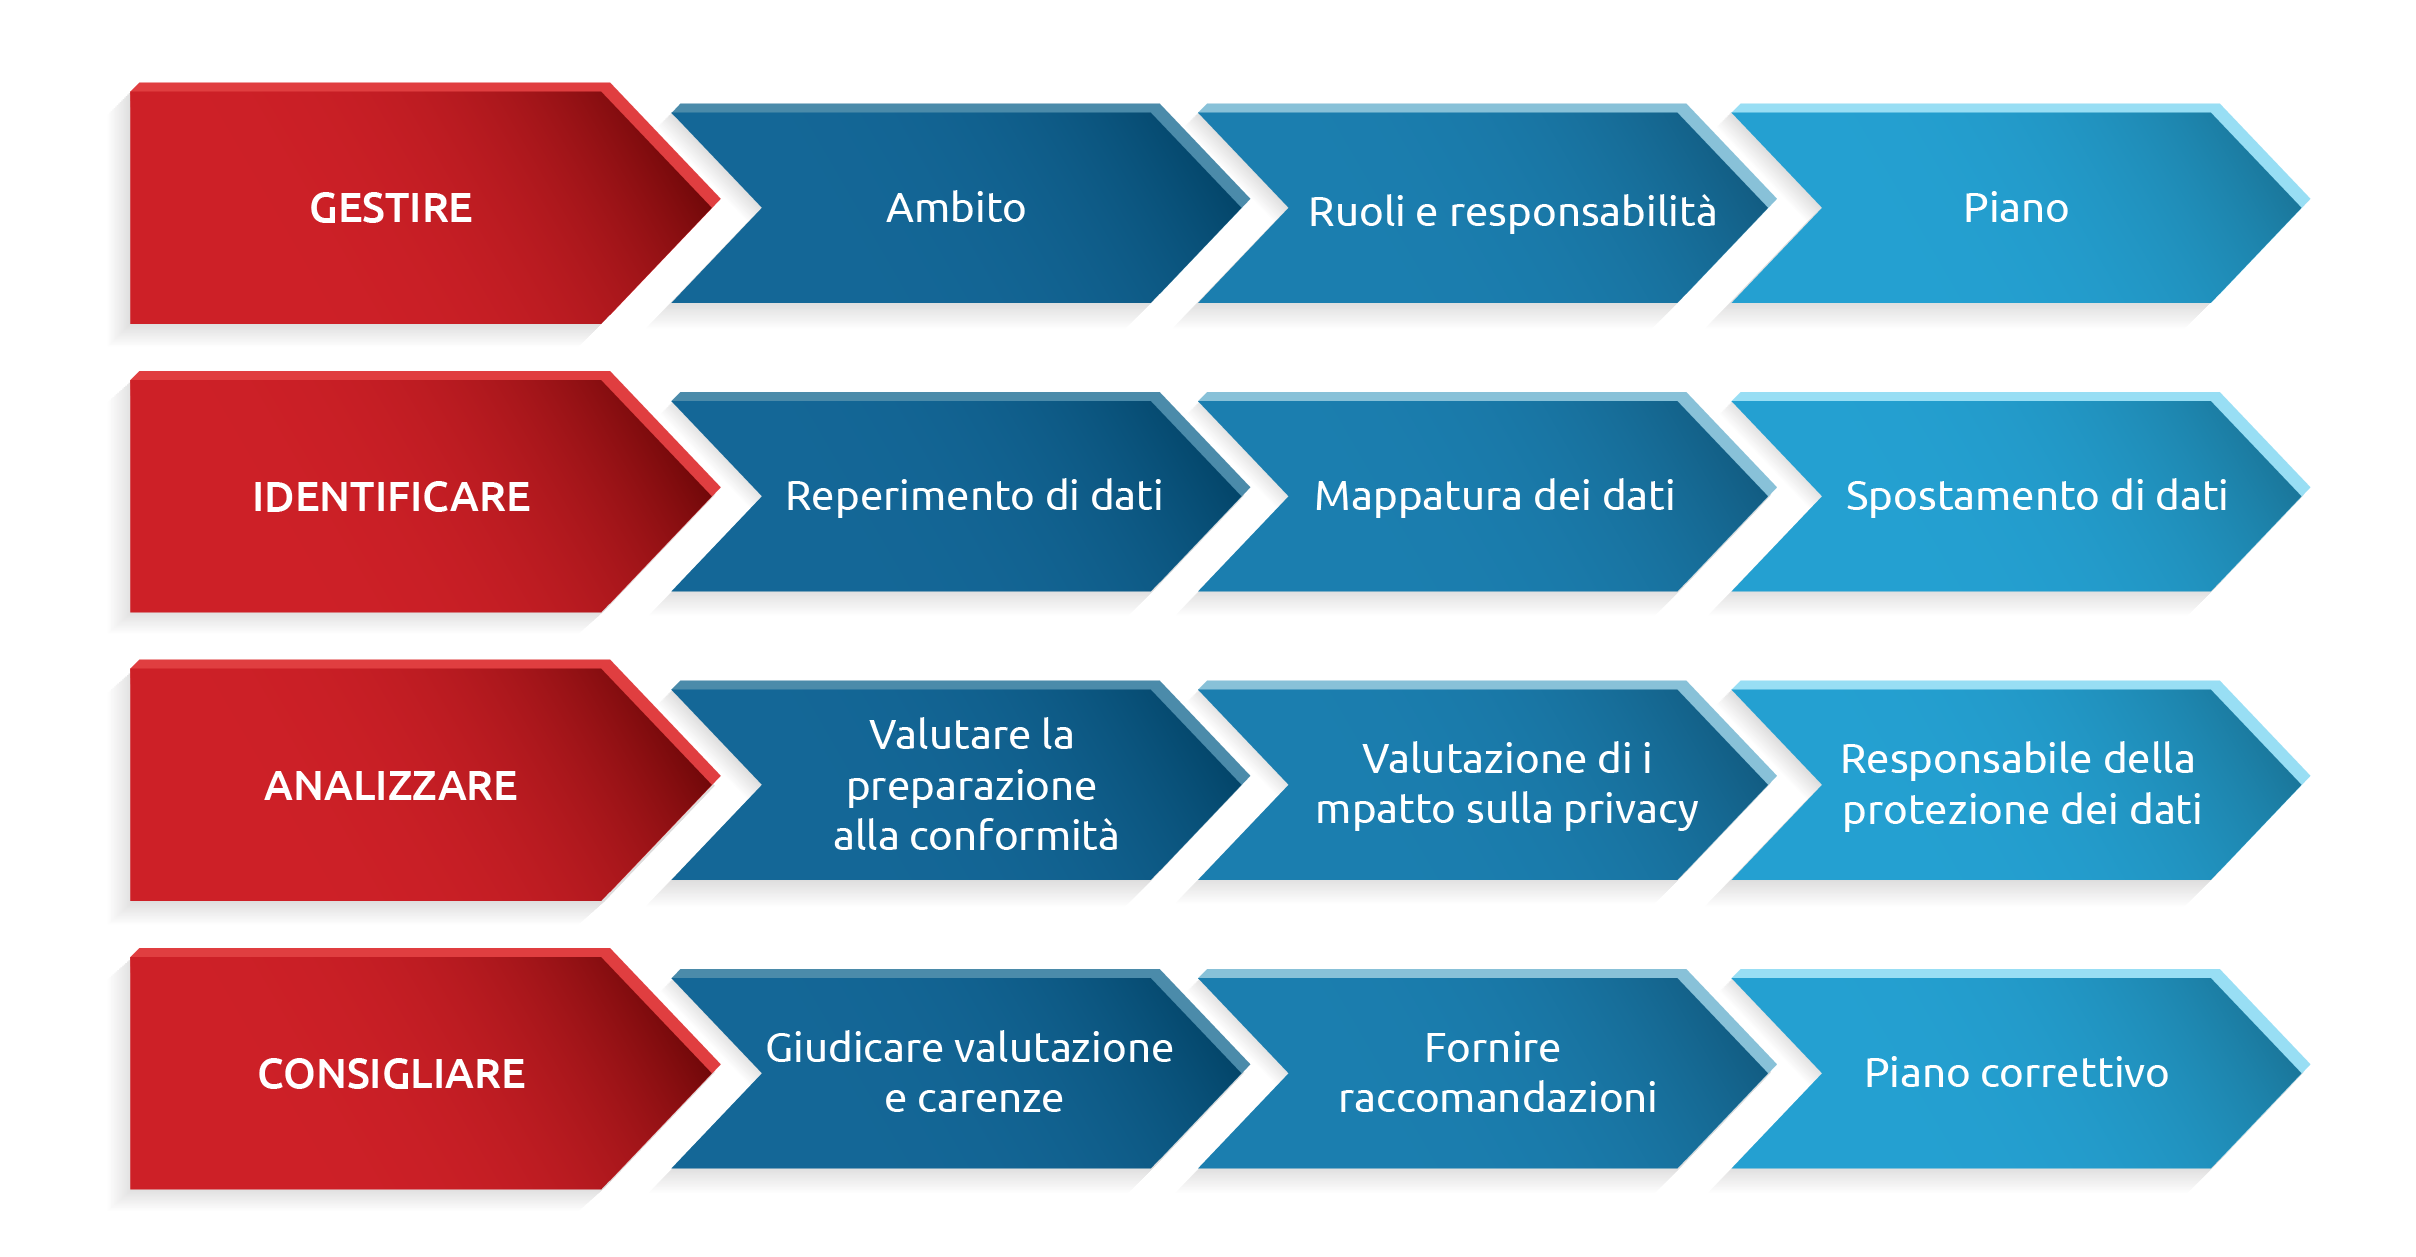 Data_Privacy_and_GDPR_Consulting_Services_Infographic_Italian